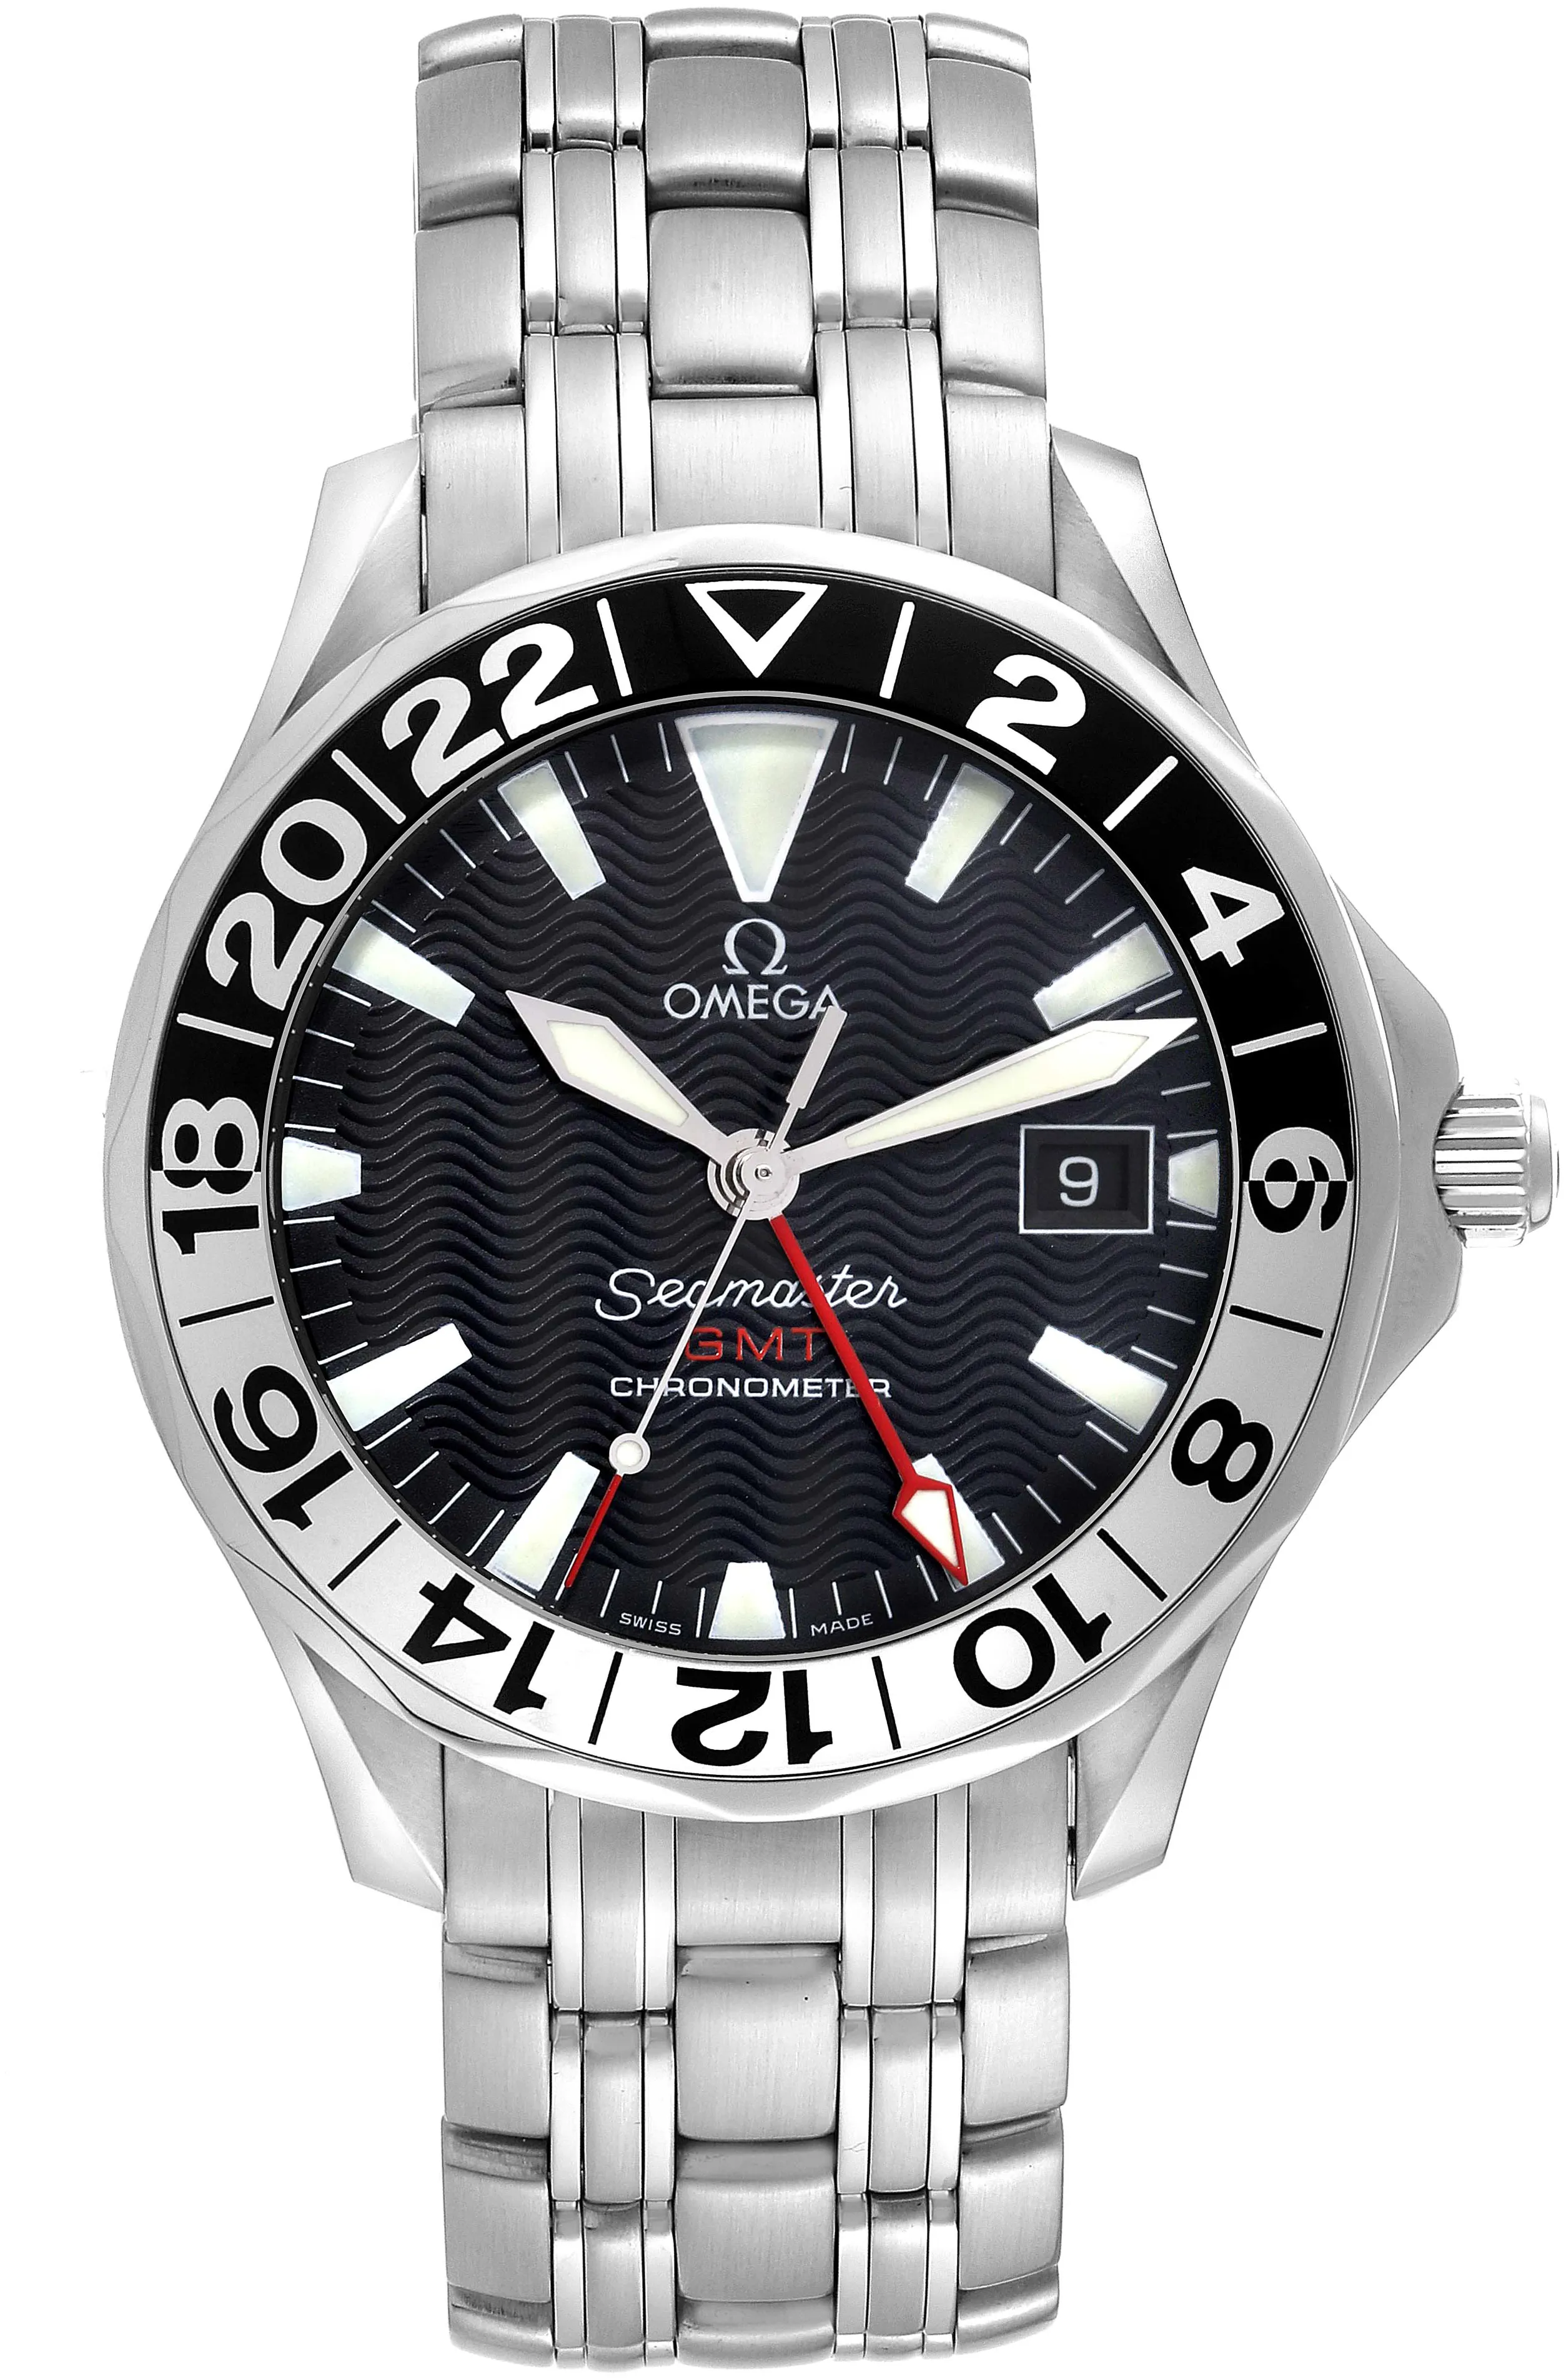 Omega Seamaster Diver 300M 25345000 41mm Stainless steel •